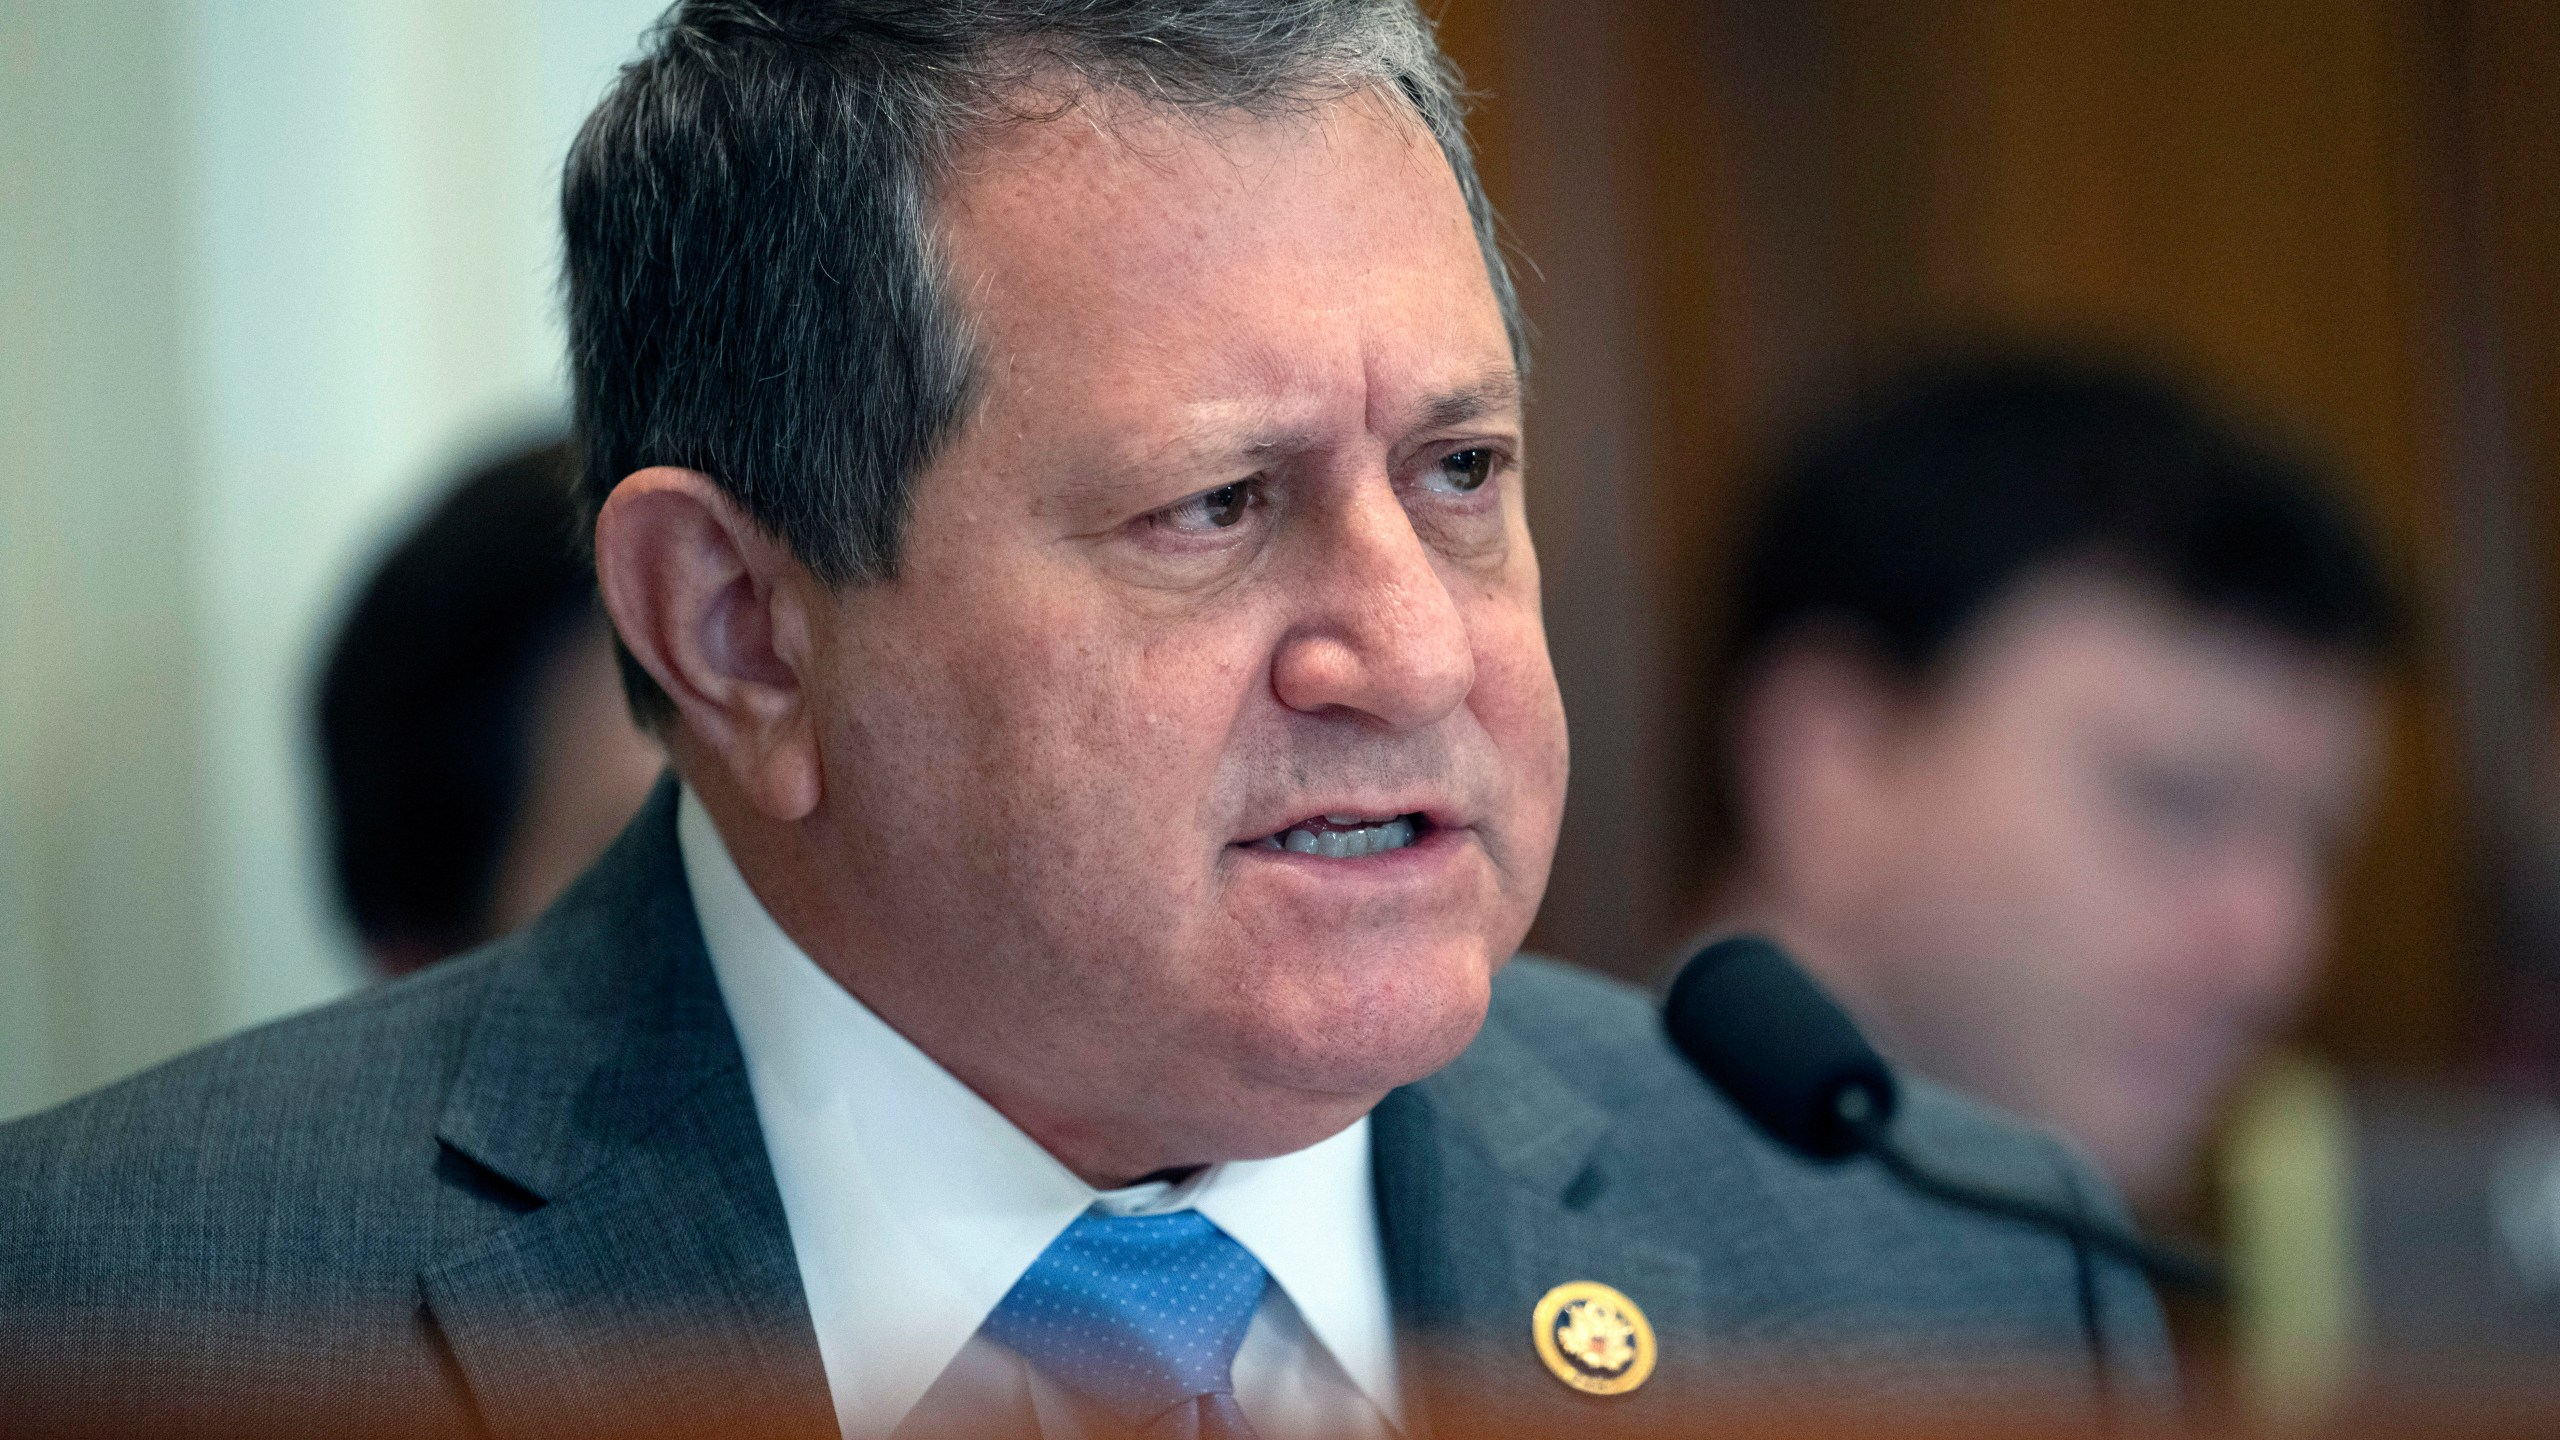 FILE - Rep. Joe Morelle, D-N.Y., questions a witness during a Committee on House Administration hearing about noncitizen voting in U.S. elections on Capitol Hill, May 16, 2024 in Washington. Morelle is preparing a constitutional amendment in response to the Supreme Court's landmark immunity ruling. (AP Photo/John McDonnell, File)